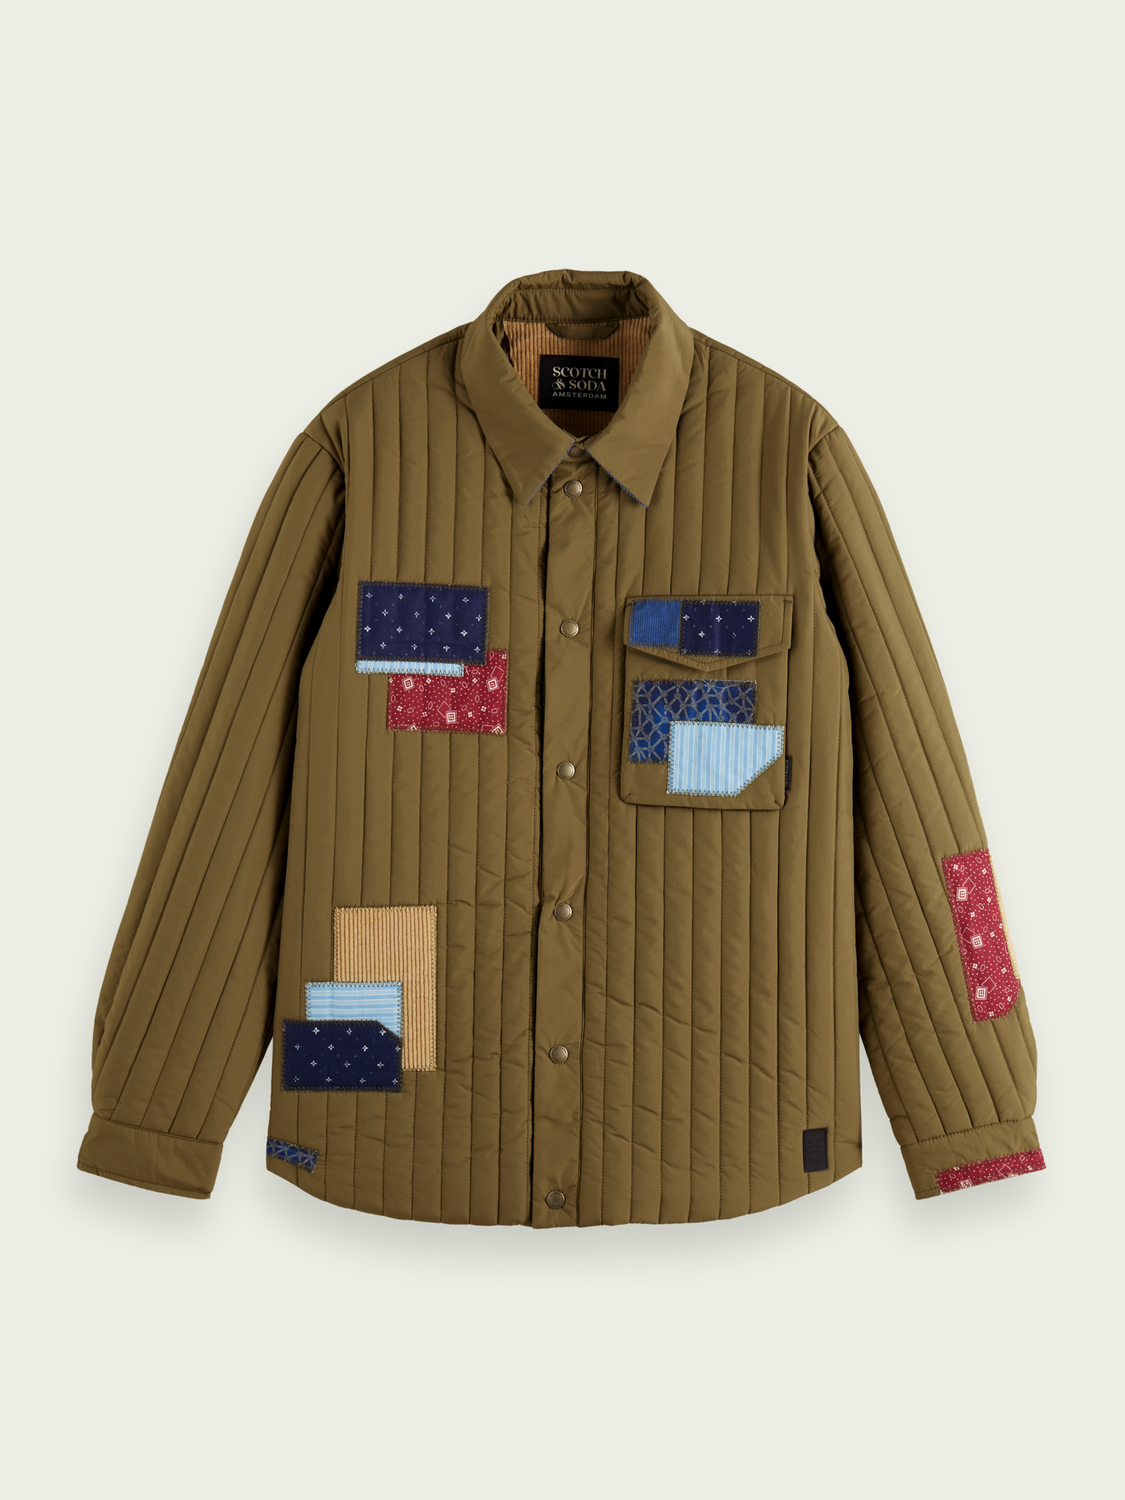 Scotch & Soda - Quilted Patched Jacket - Clique Apparel